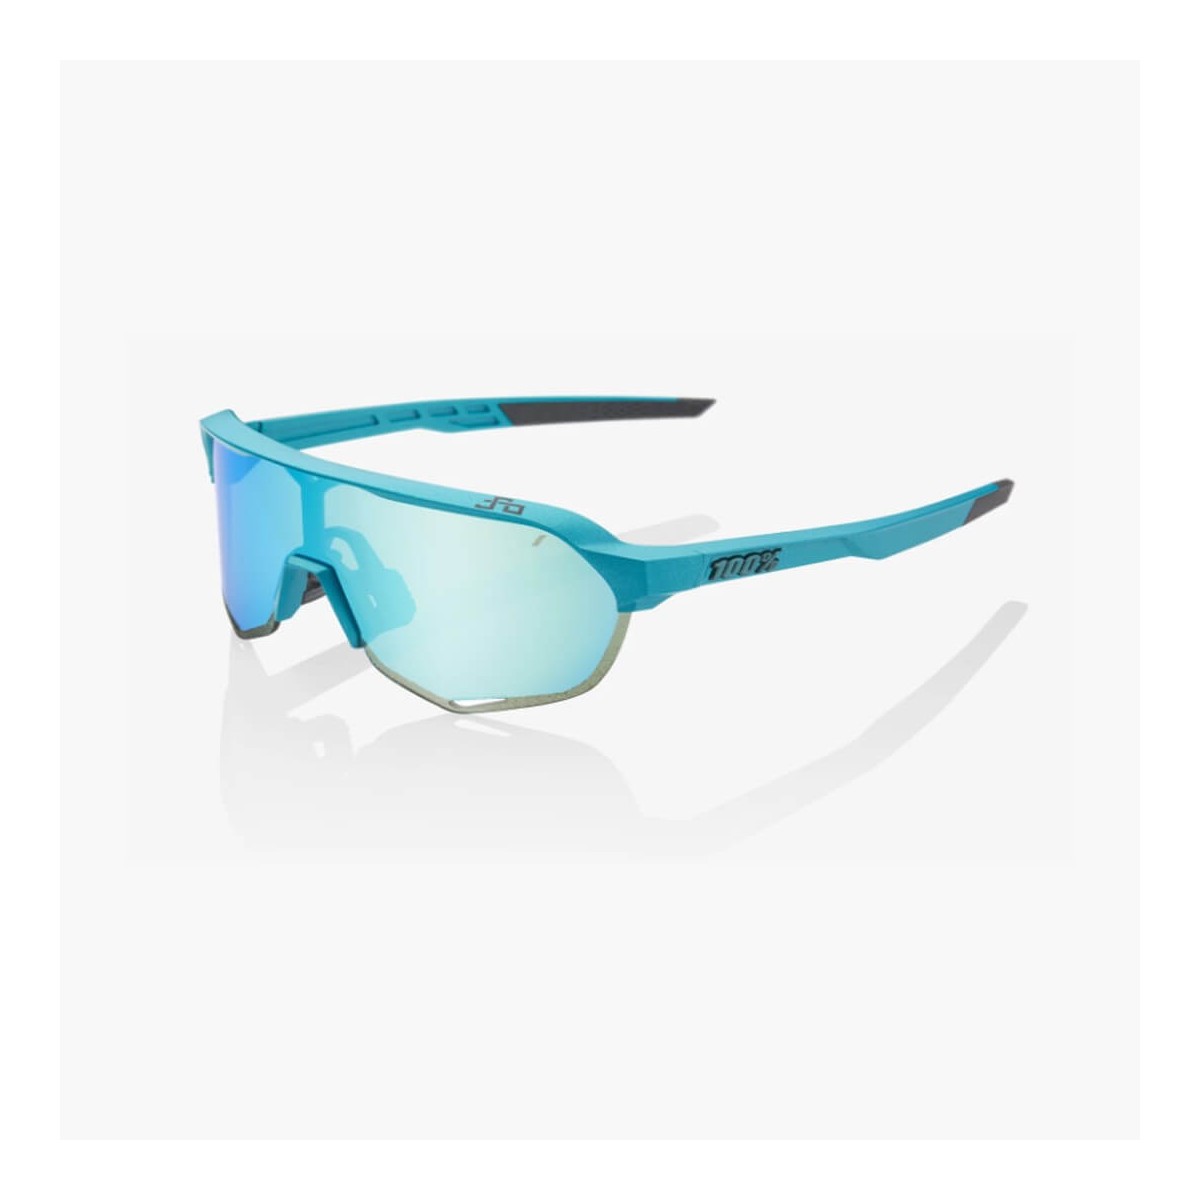 Image of Brille 100% S2 Limited Edition Peter Sagan Blauer Topas